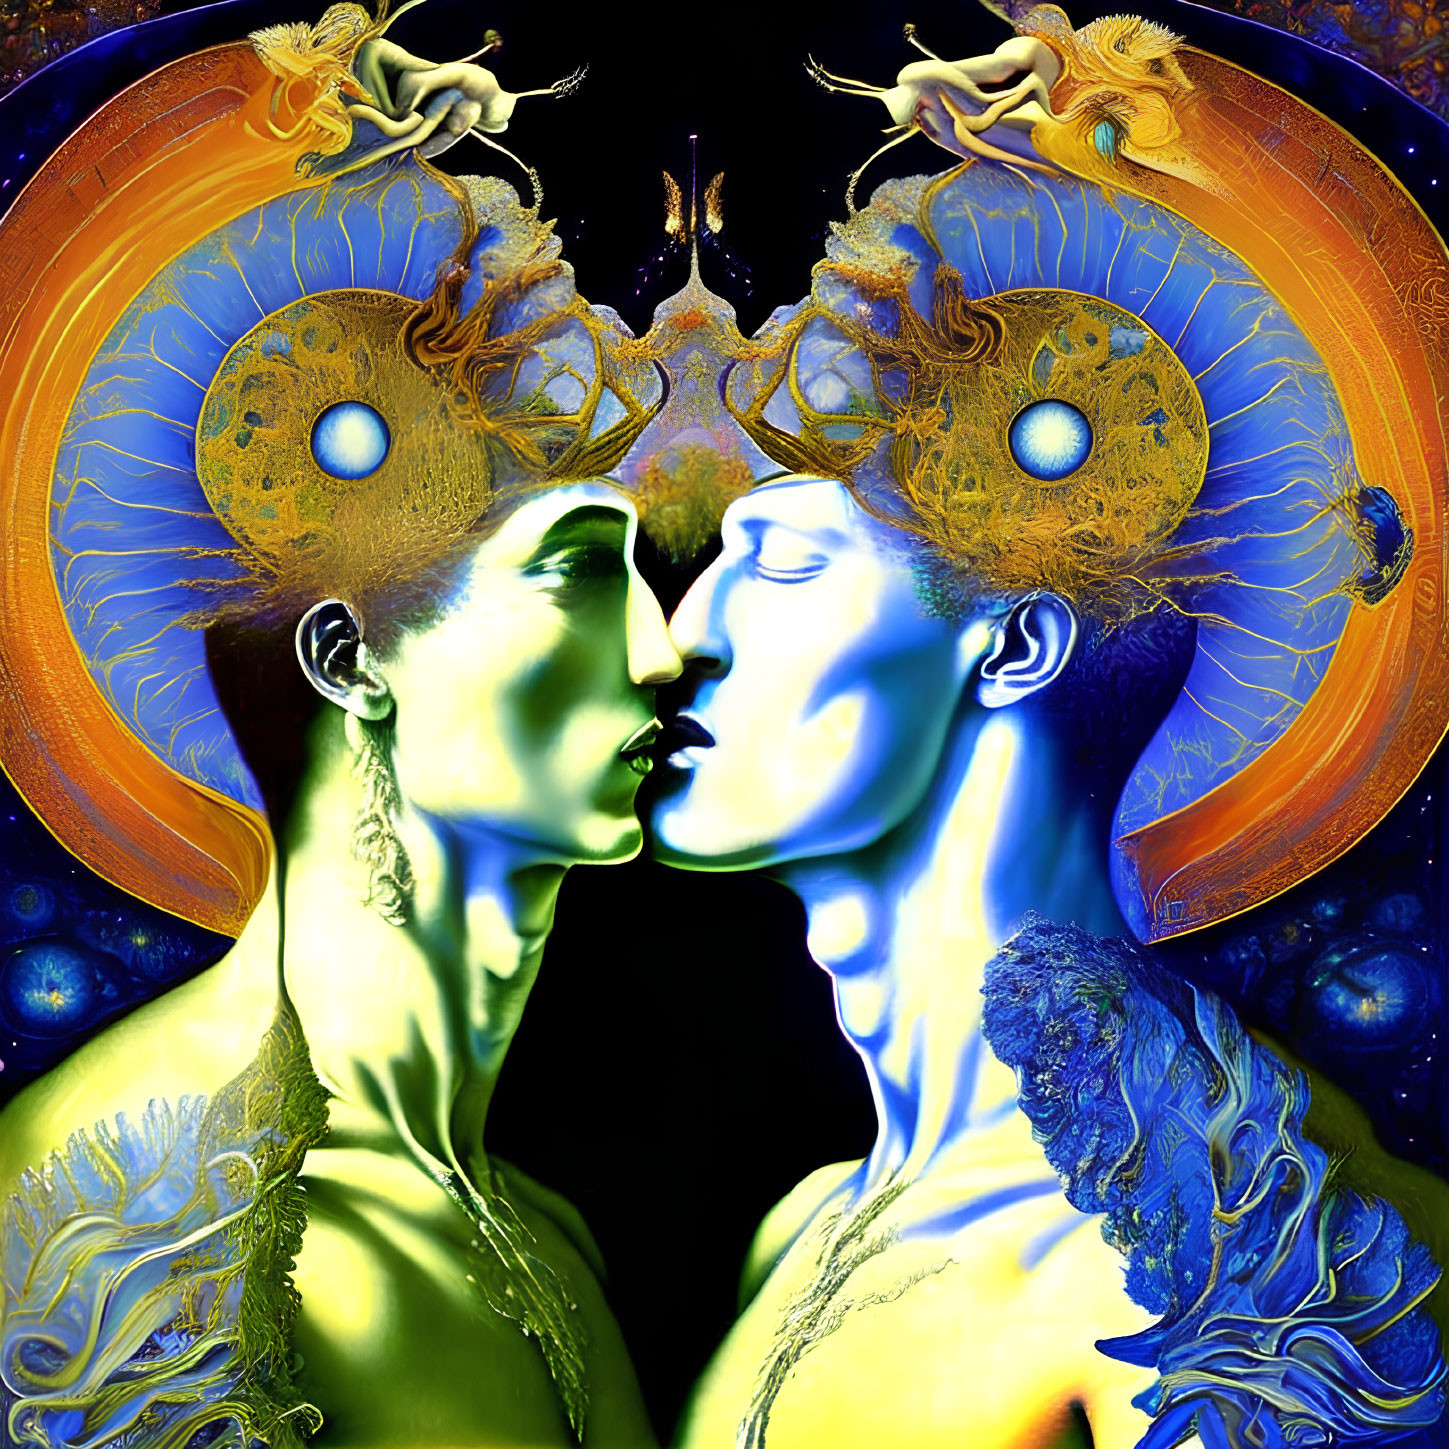 Stylized figures in mirrored pose with elaborate headpieces on dark celestial background